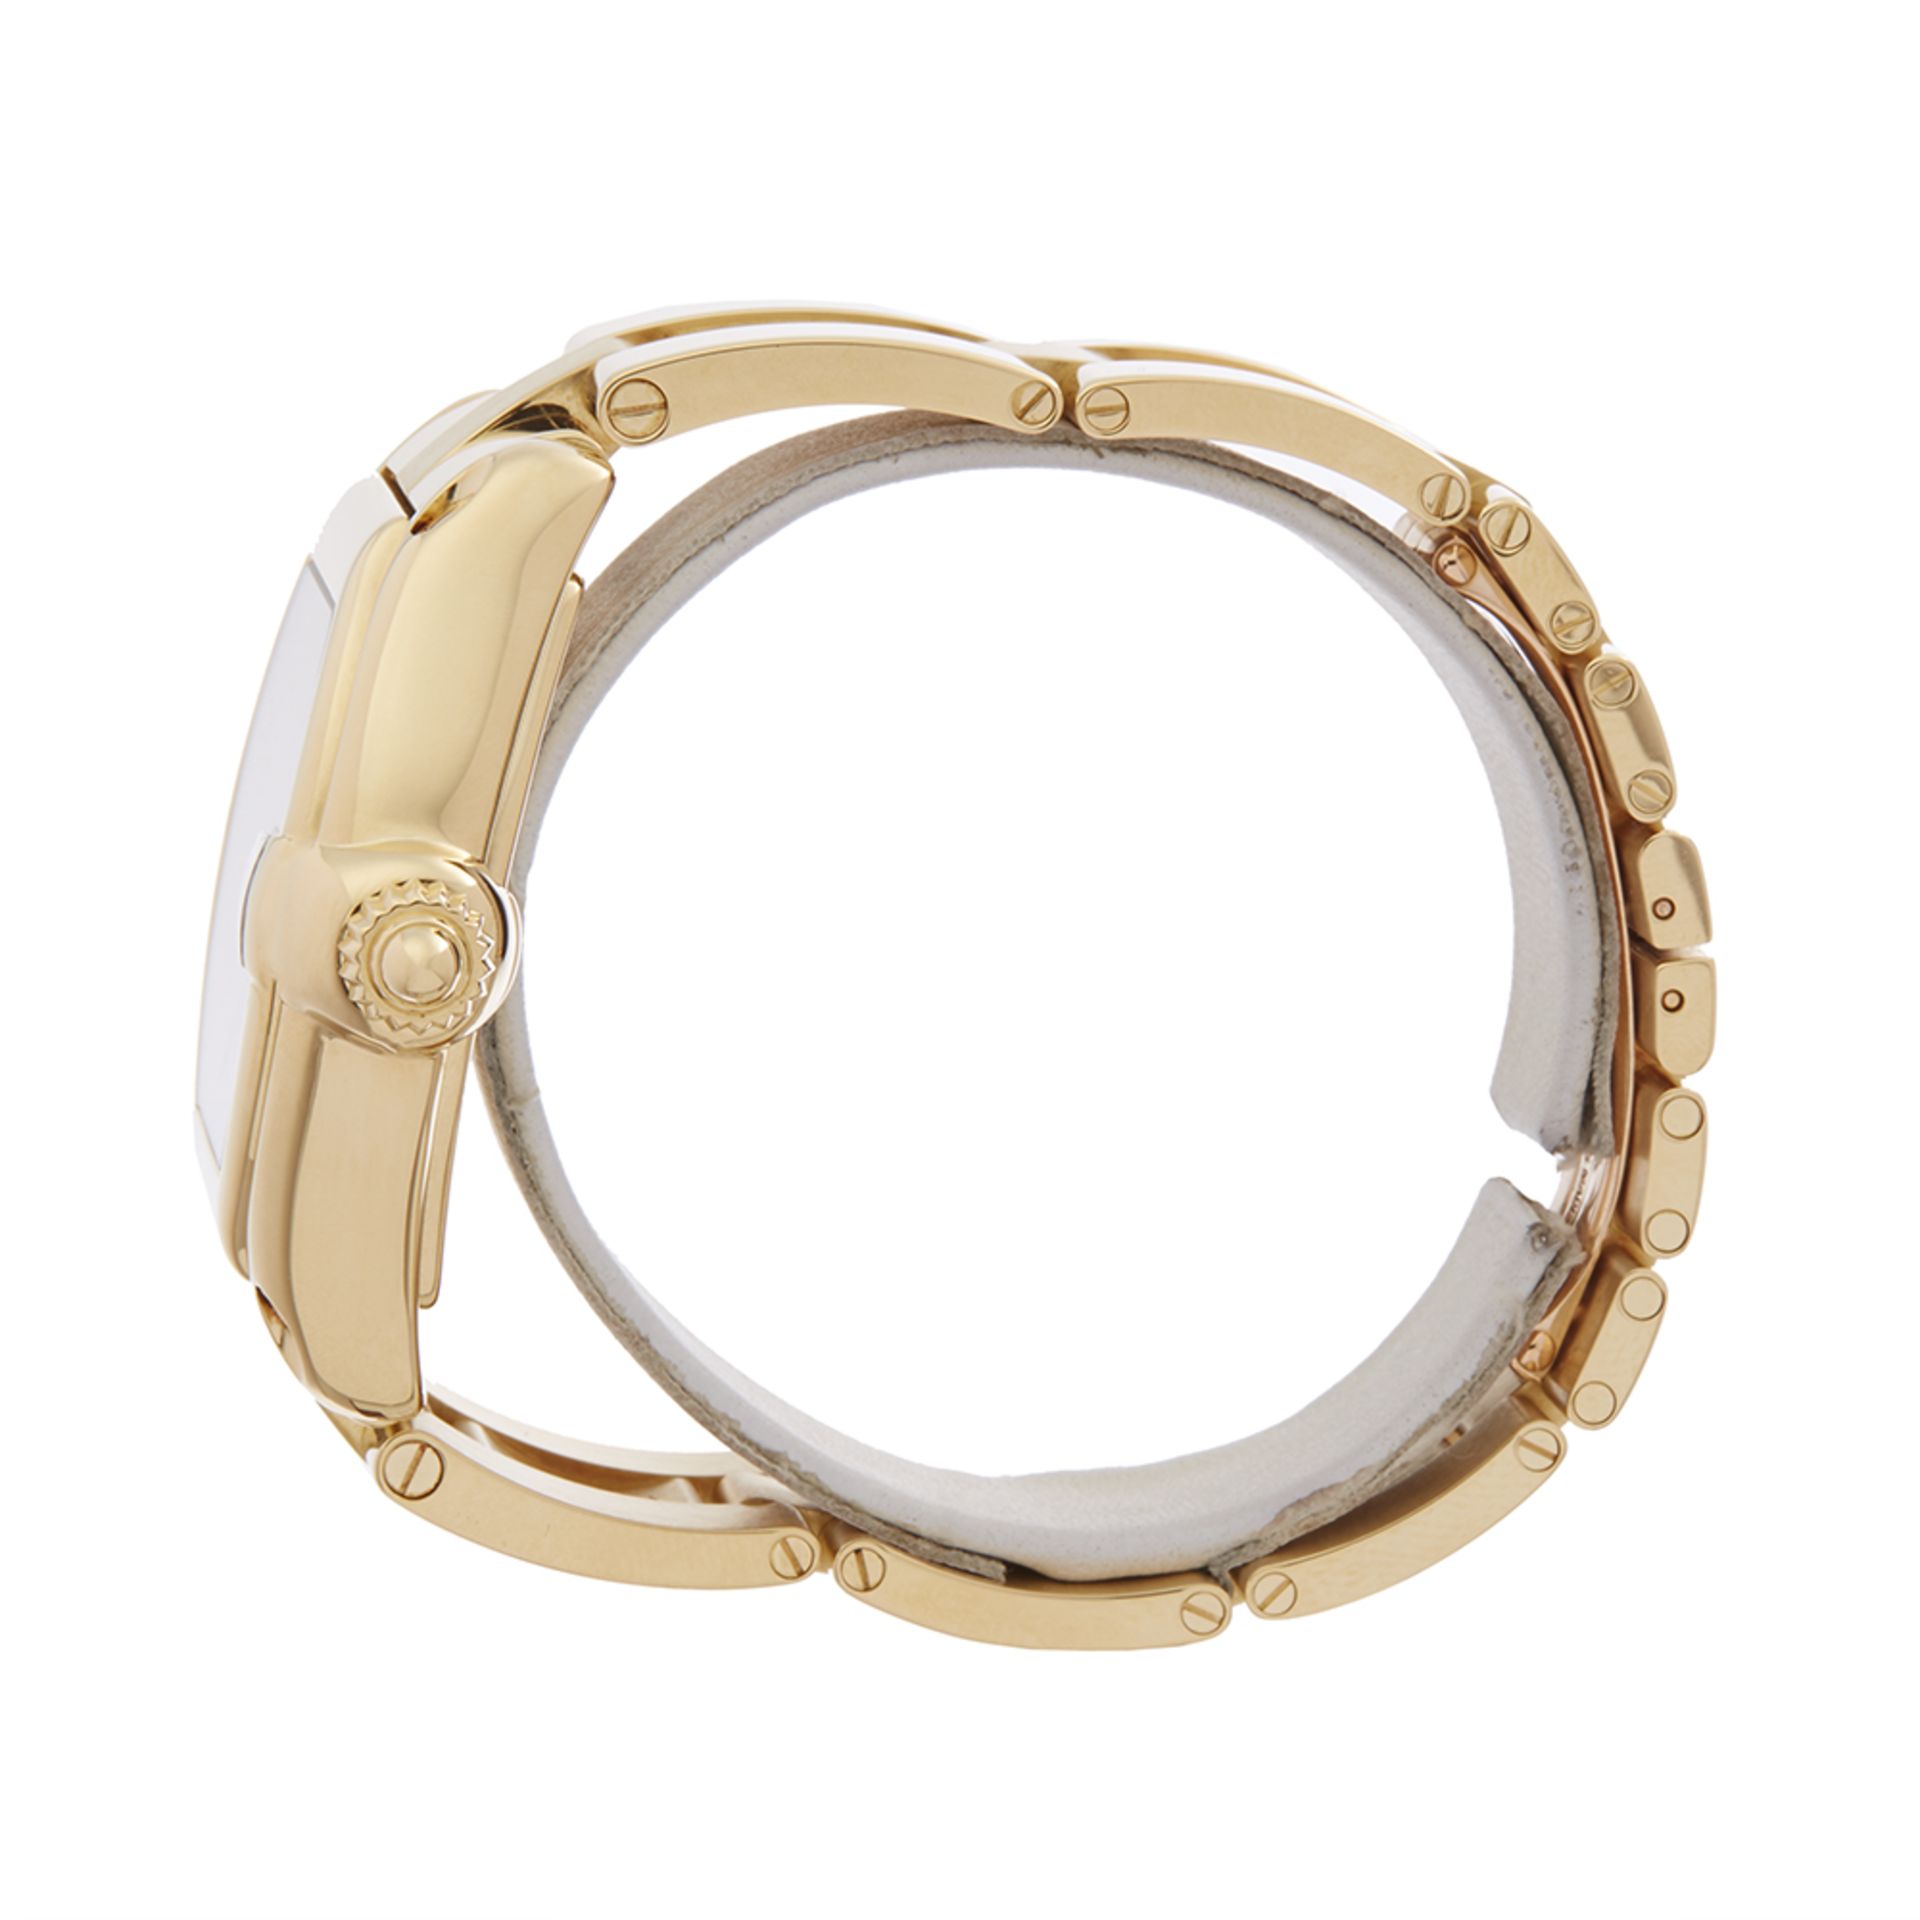 Cartier Roadster 18K Yellow Gold - 2524 or W620005V2 - Image 3 of 7